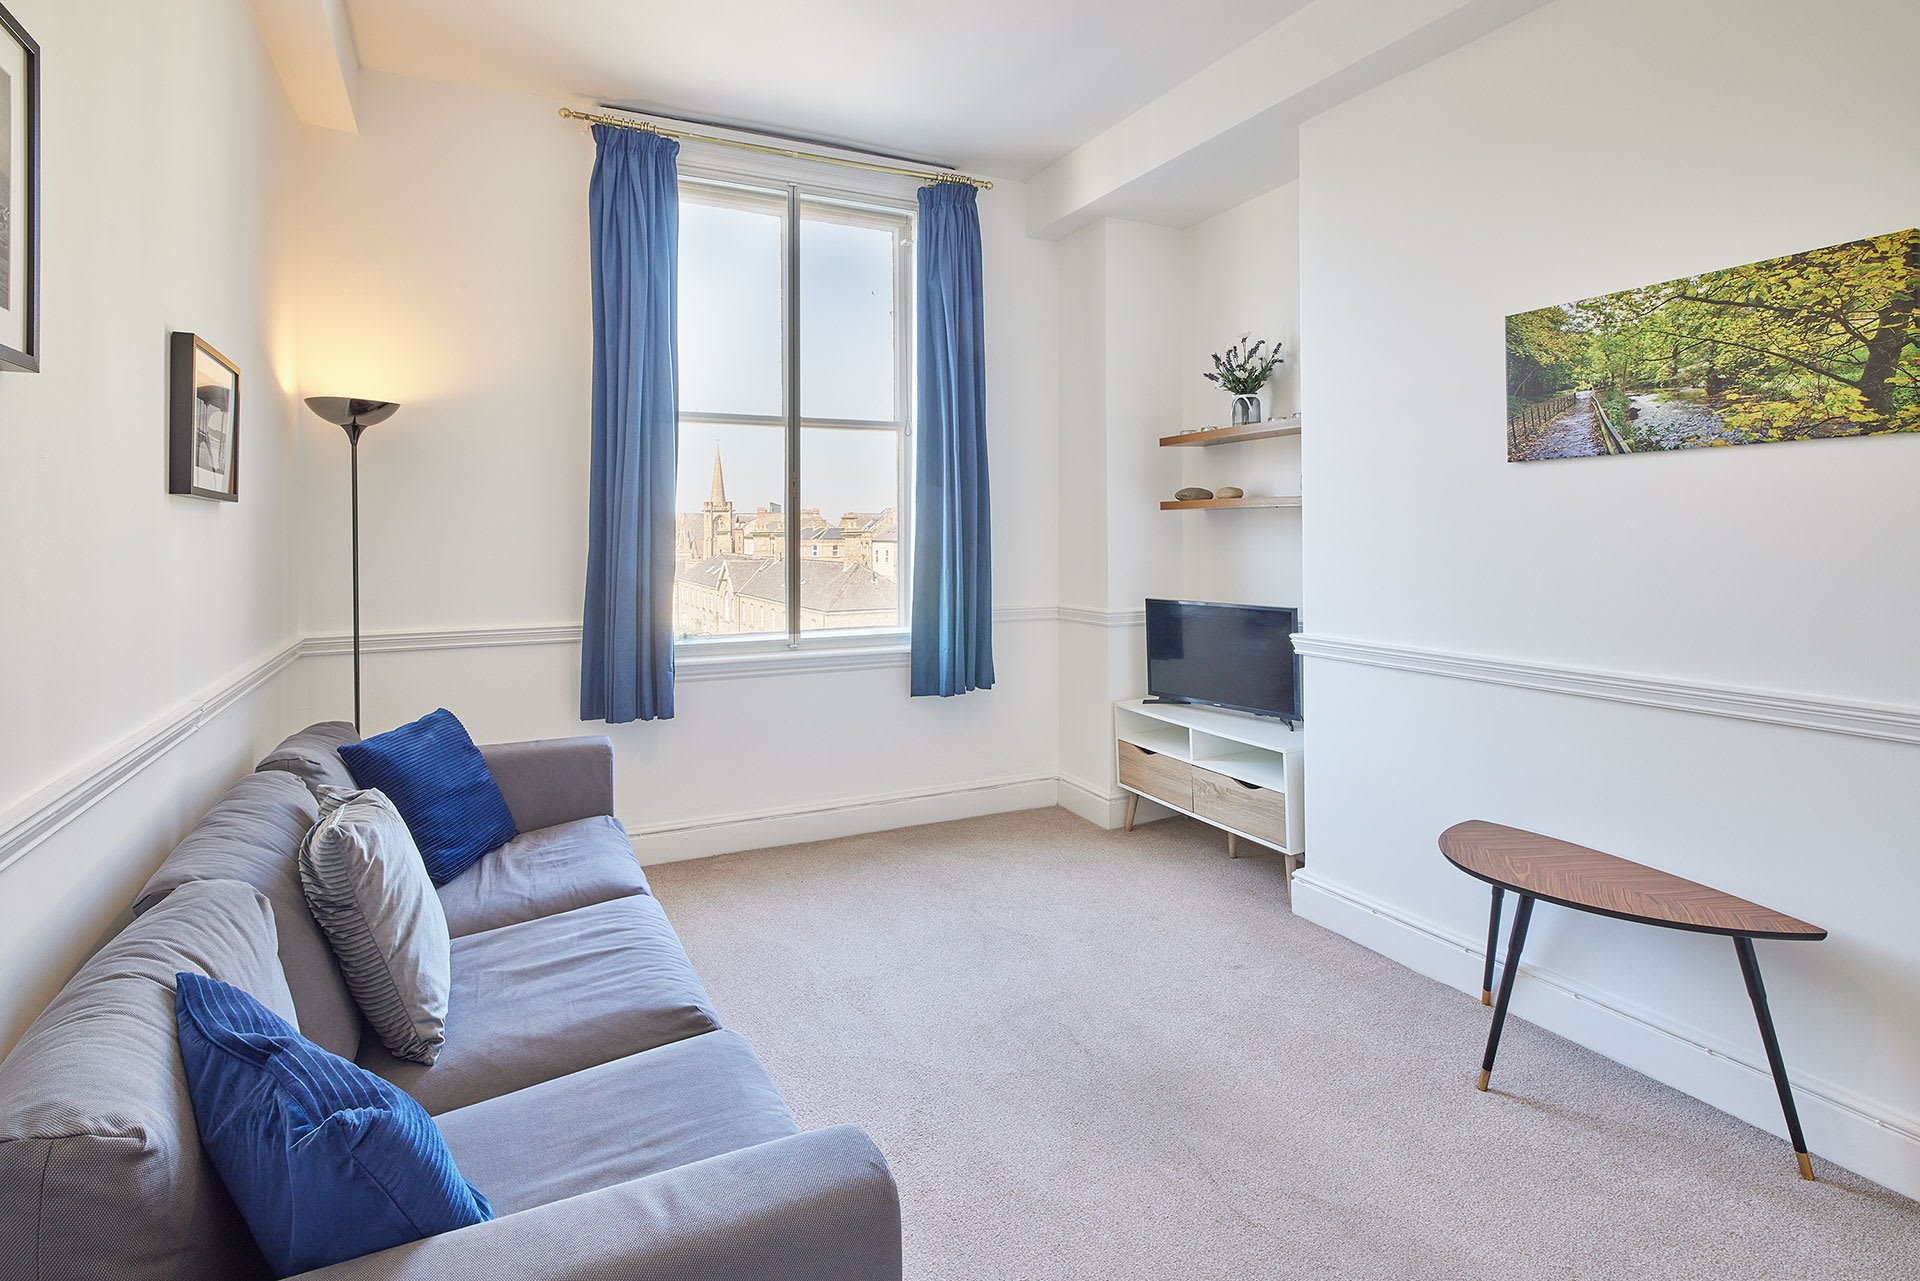 Apartment 19 @ The Zetland in Saltburn-by-the-Sea